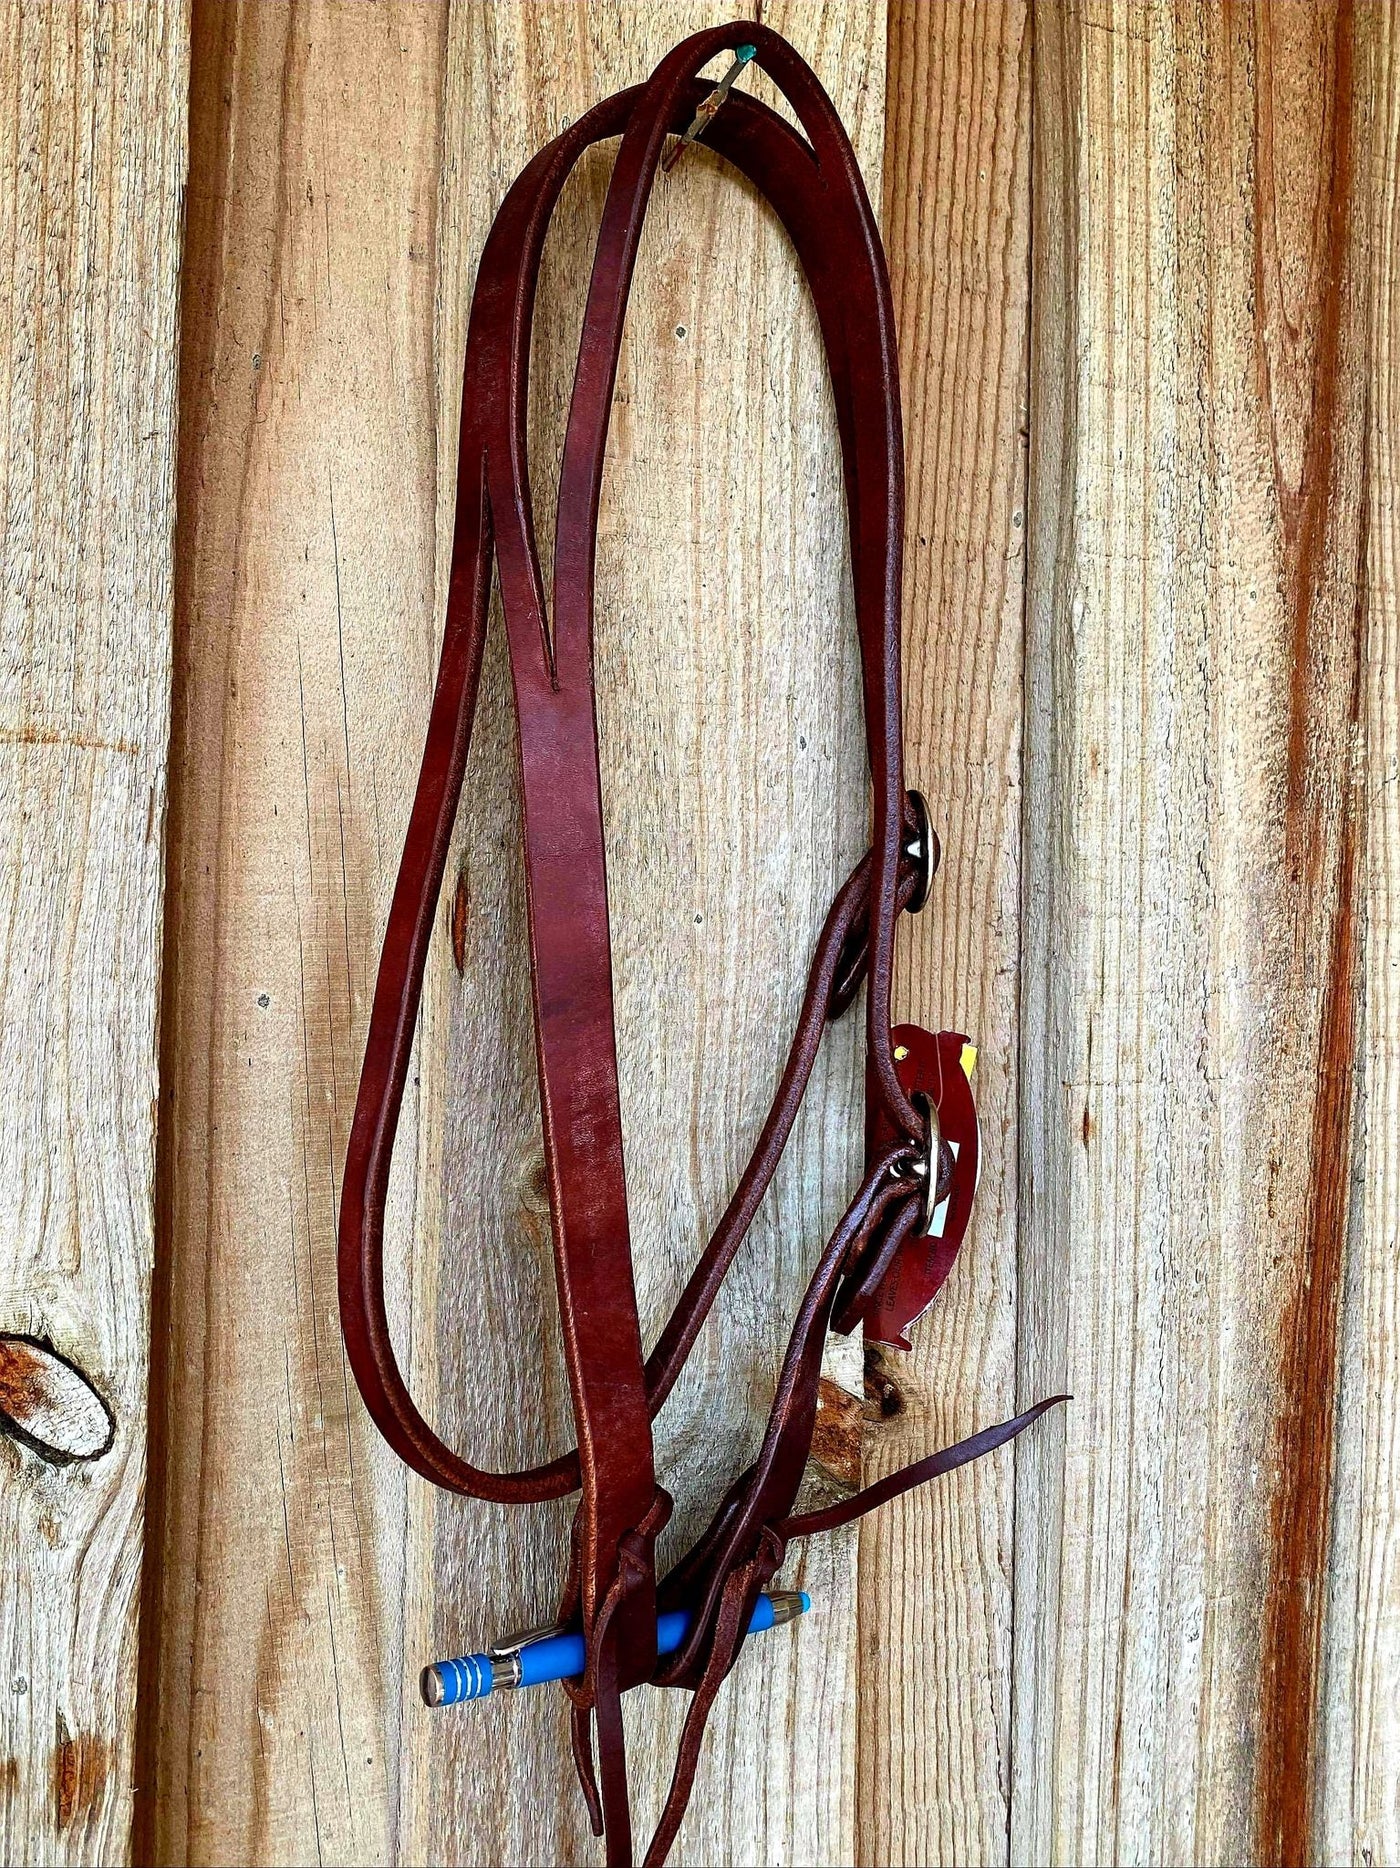 Western Bridle One Ear Heavy oiled harness leather split ear Bridle with throat lash